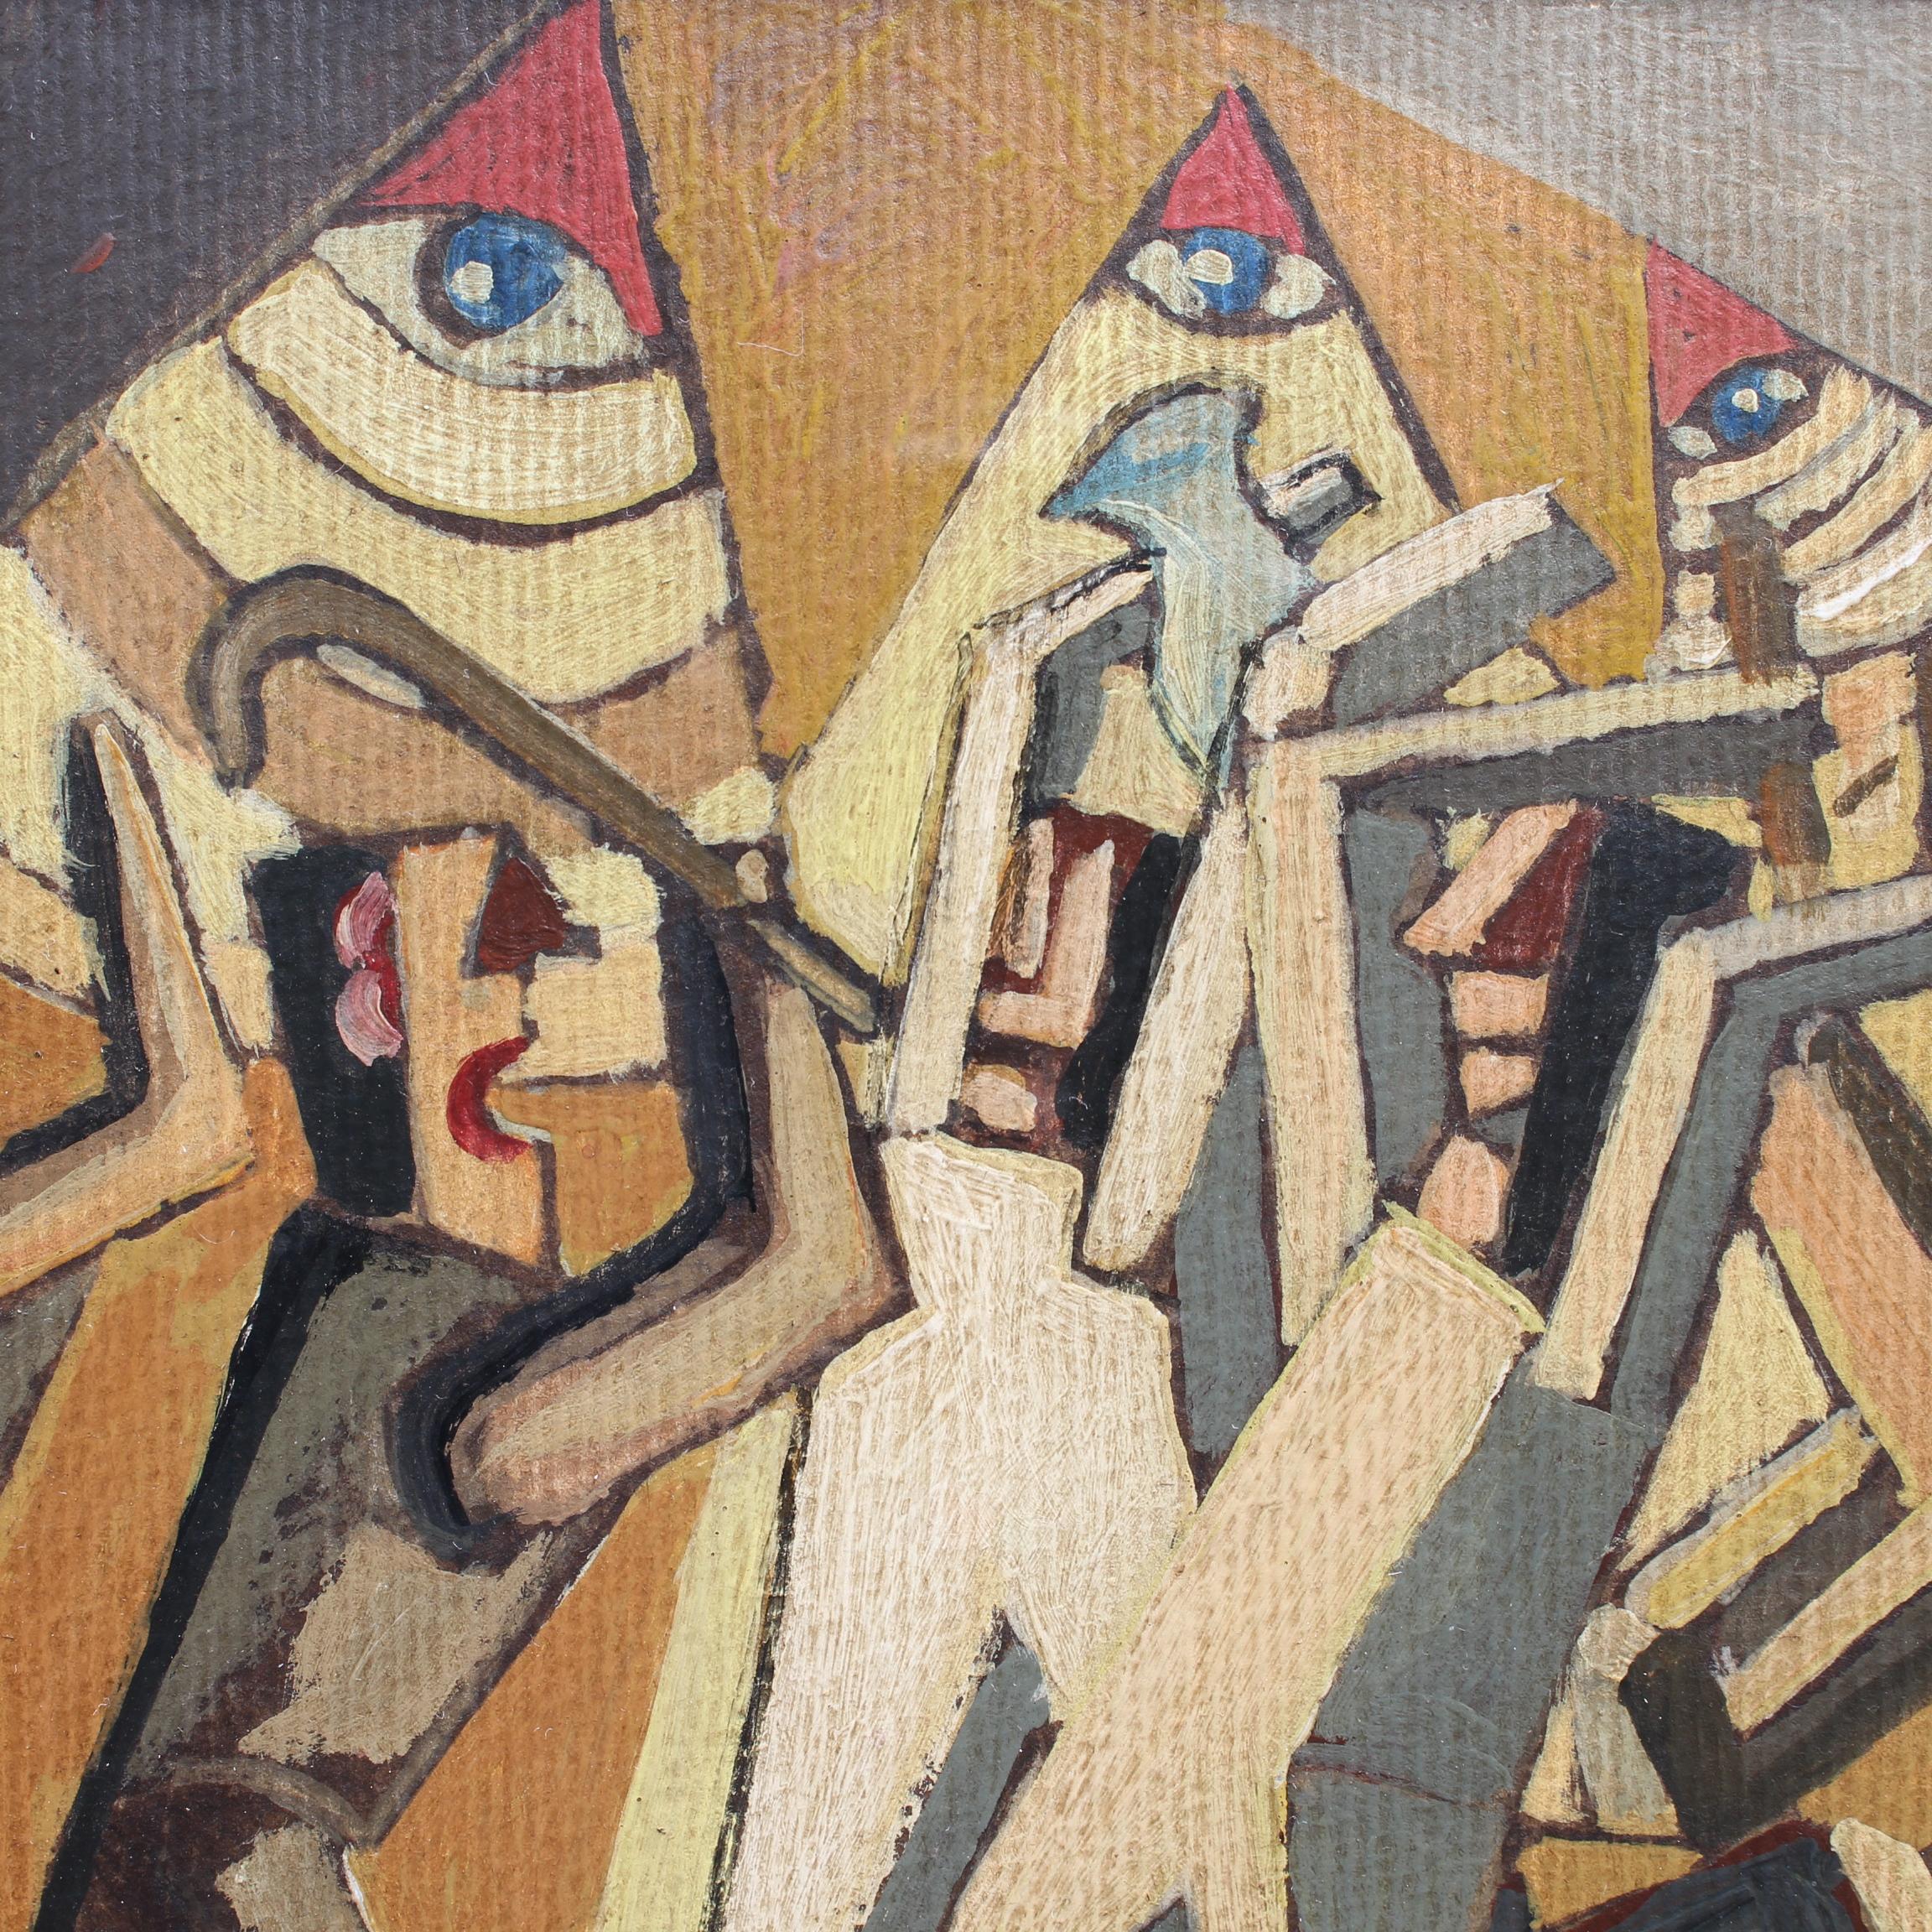 'The Eye', oil on paper, by F. DuParc (French School circa 1940s - 1960s). Once in a while this gallery comes upon a work of art that stands out even from a collection of stunning paintings. The artist pits darkly-dressed workers attacking the